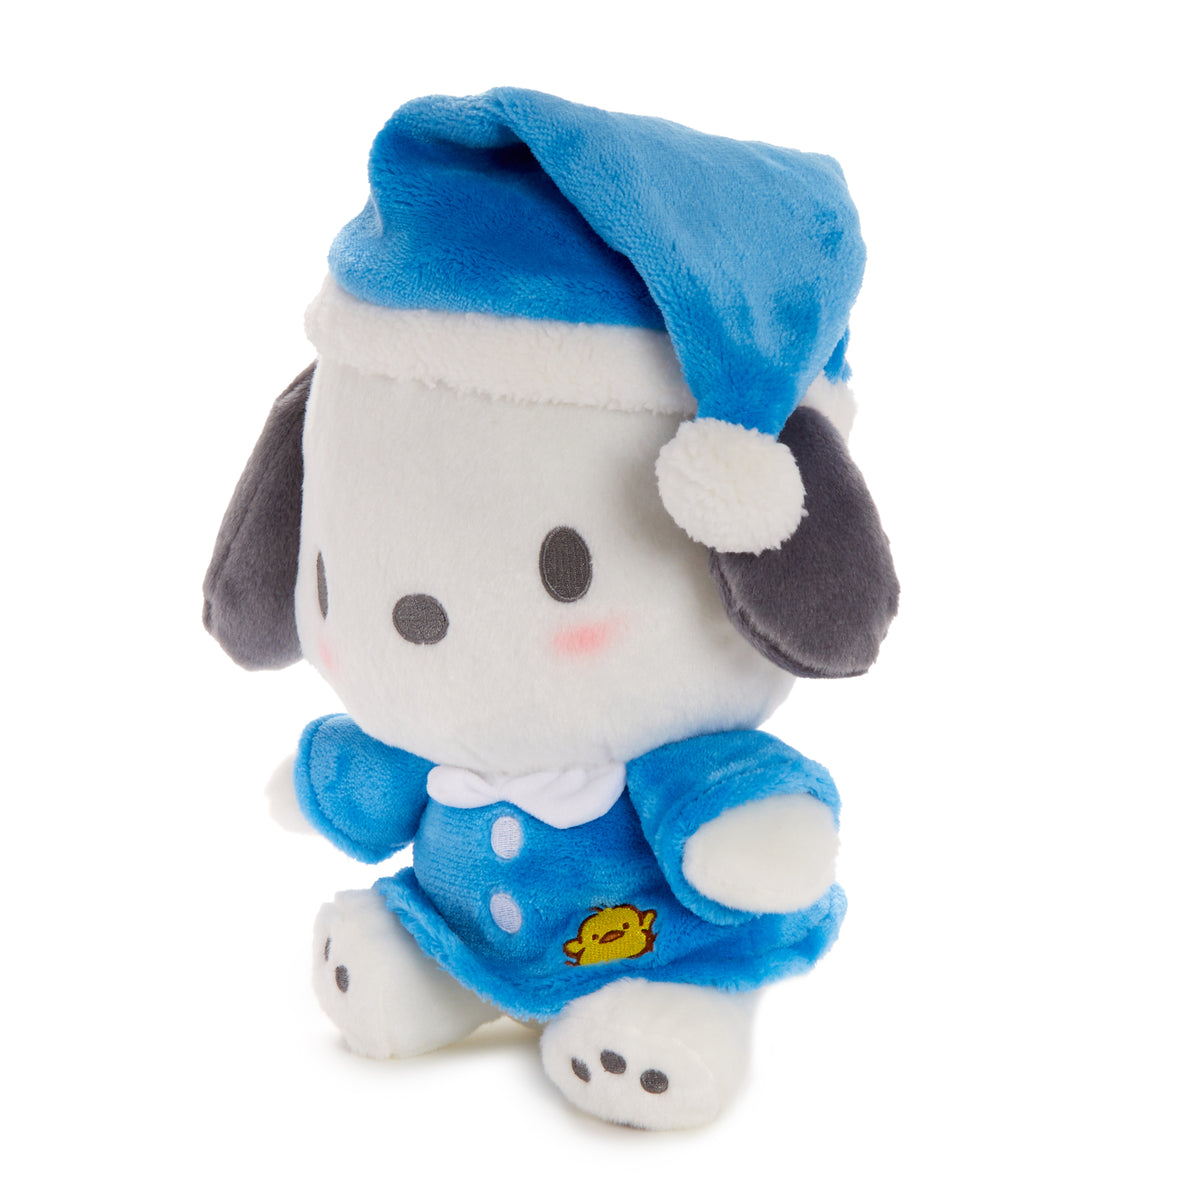 Pochacco Plush Toy Delights Await You